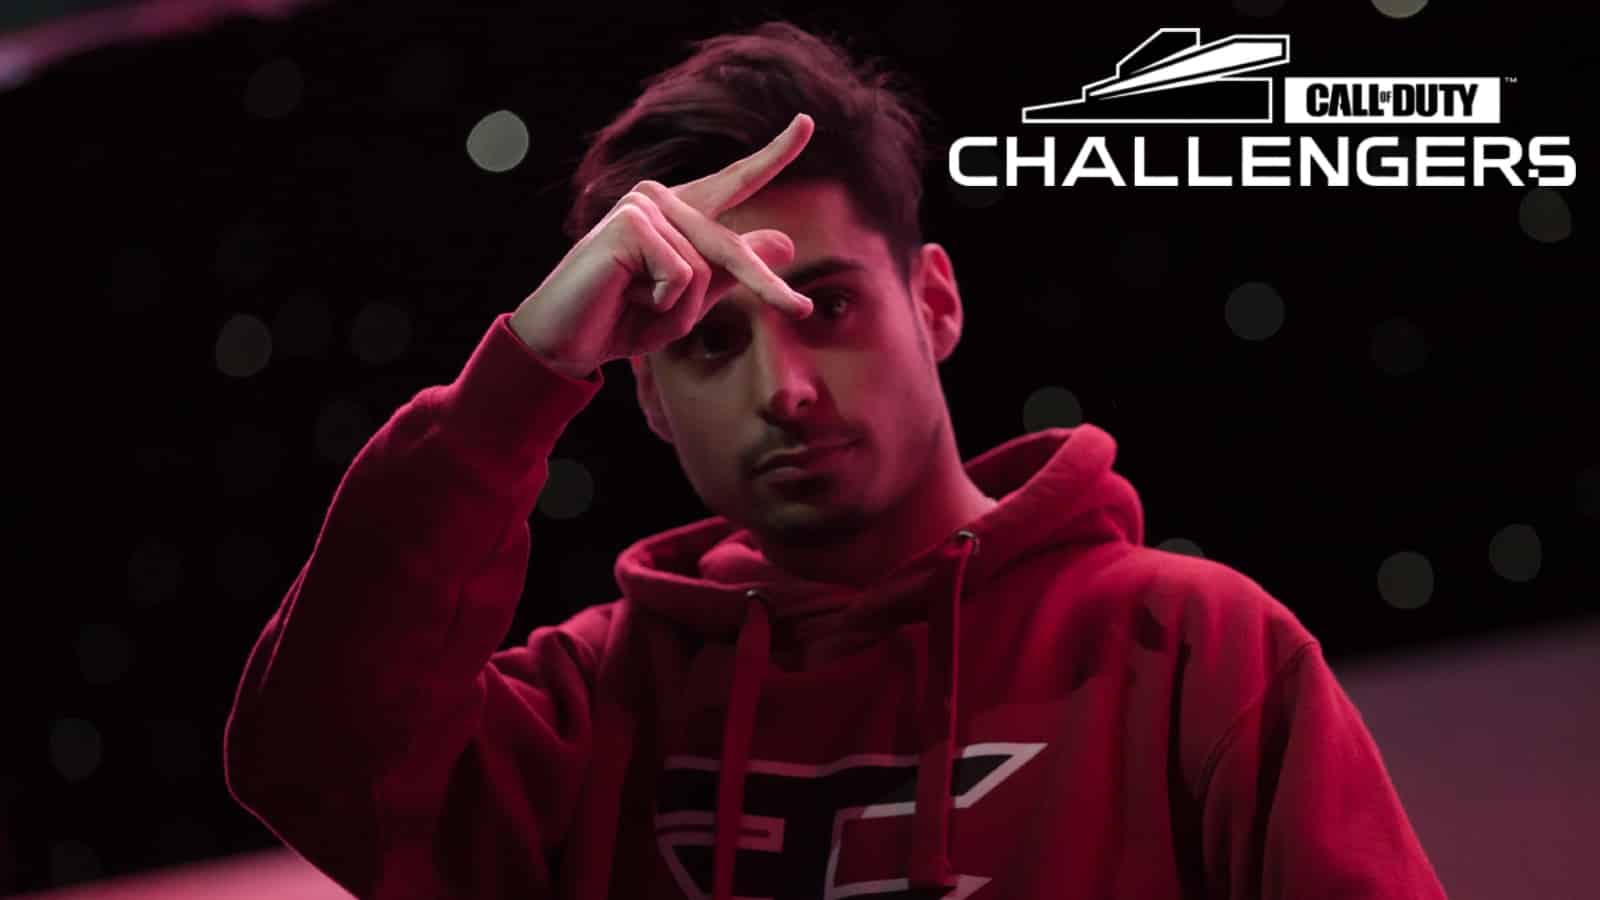 zoomaa doing faze up sign with call of duty challengers logo in corner